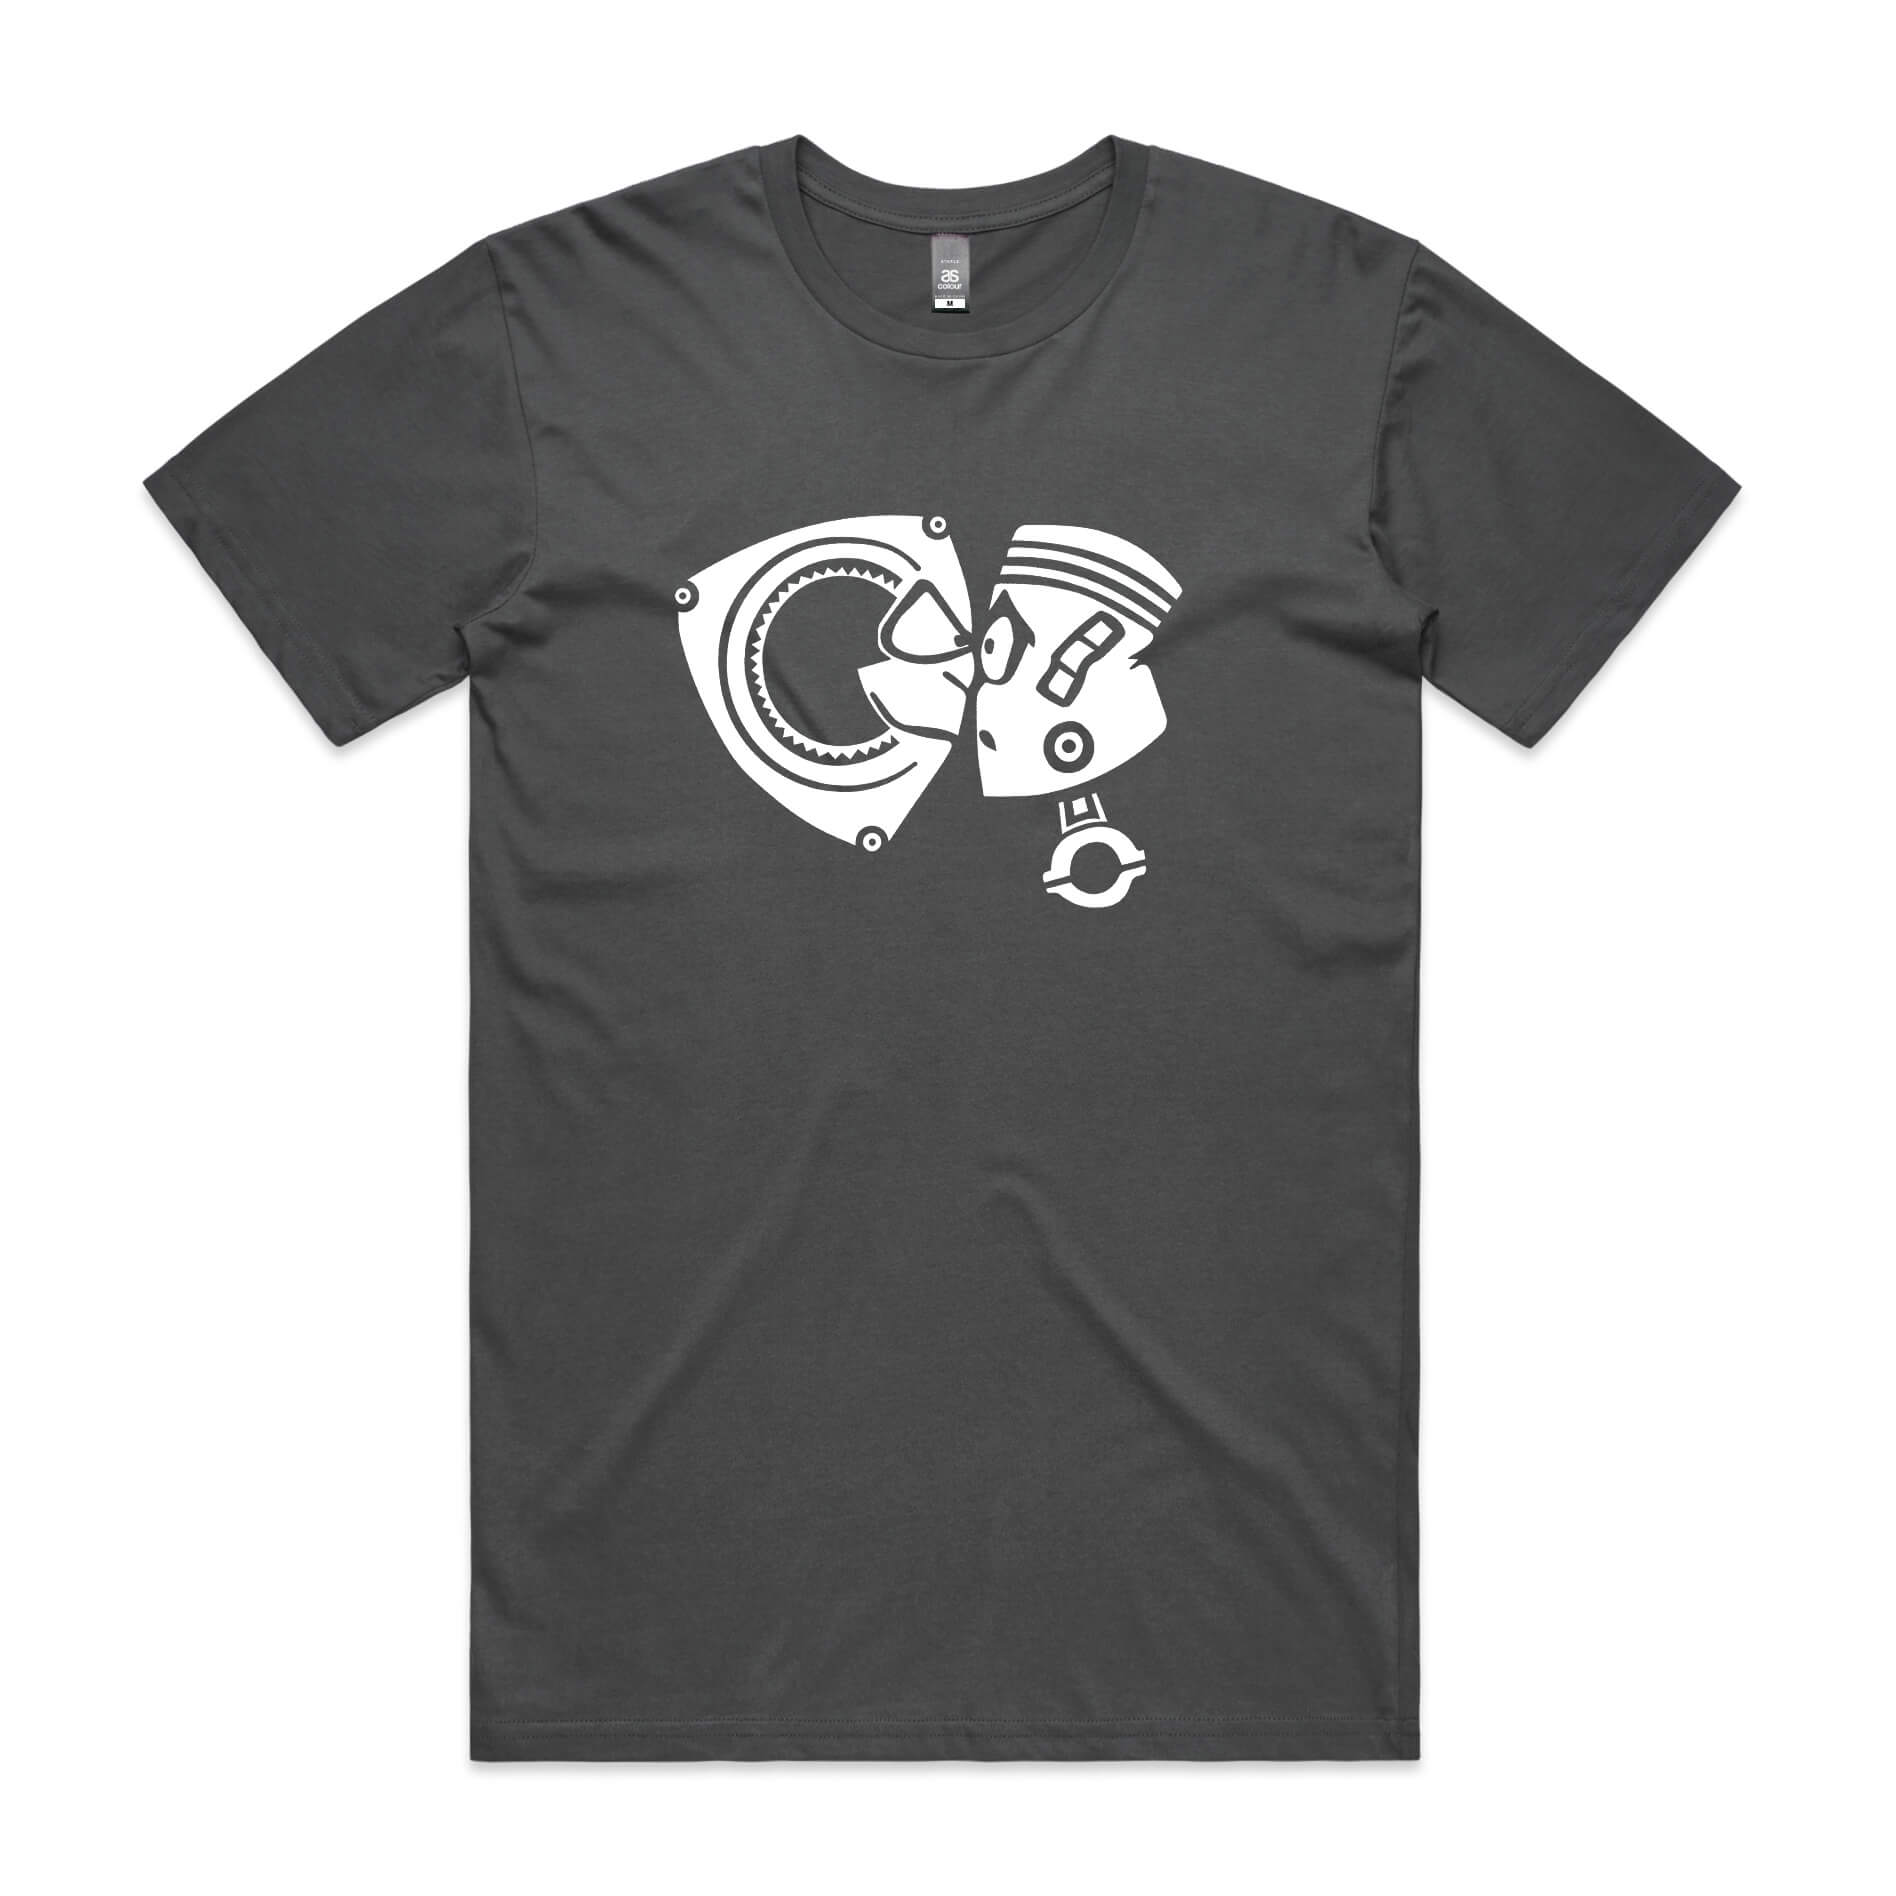 Rotary vs piston t-shirt in charcoal grey with white cartoon graphic